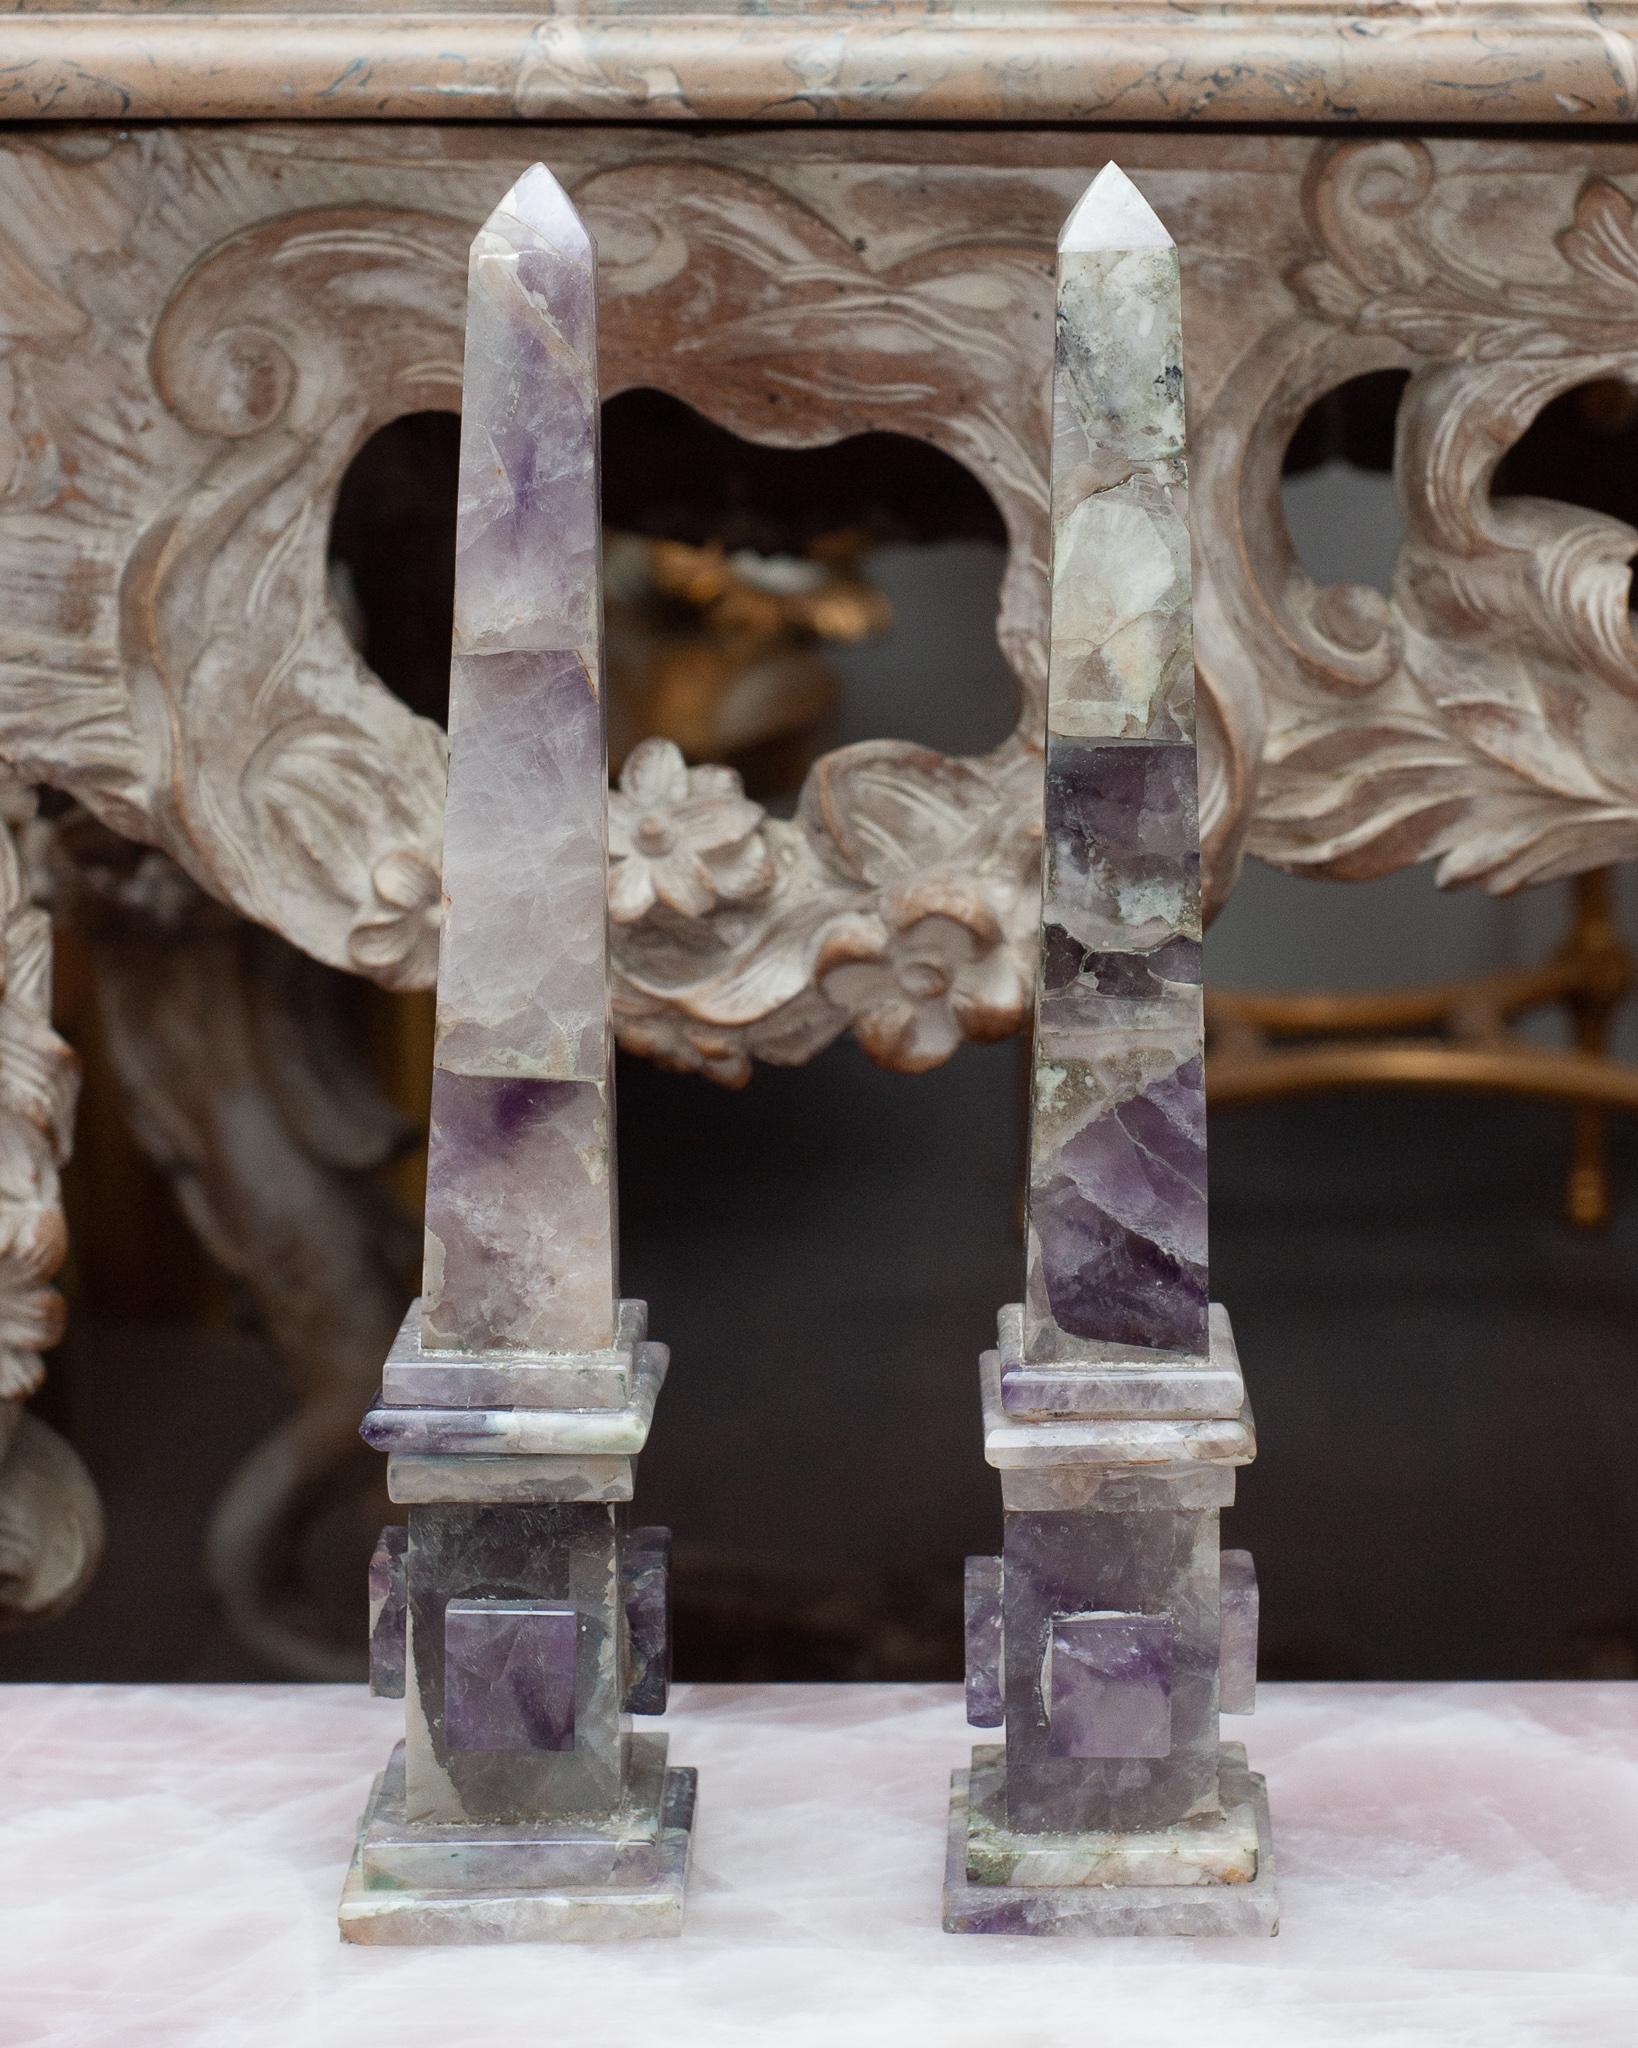 This spectacular pair of obelisks is constructed of amethyst, a lavender to purple translucent semi-precious crystal that is a form of quartz found in many locations around the world and forms as a transparent, terminated crystals in all sizes of